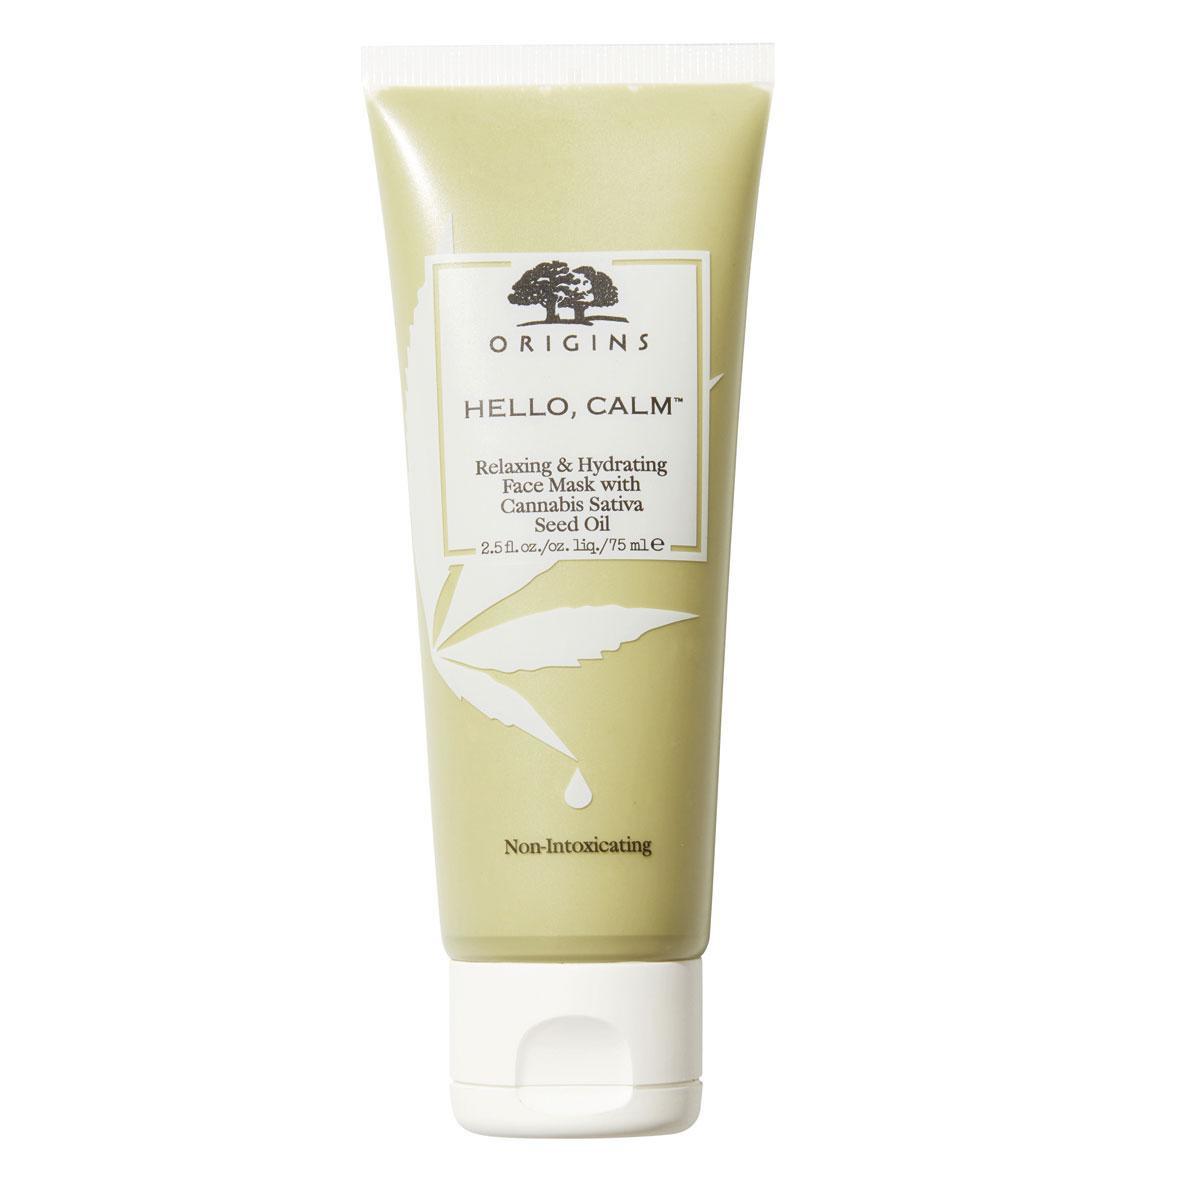 Hello Calm, Relaxing & Hydrating Face Mask with Cannabis Sativa Seed Oil, Origins, 26 euros les 80 ml.